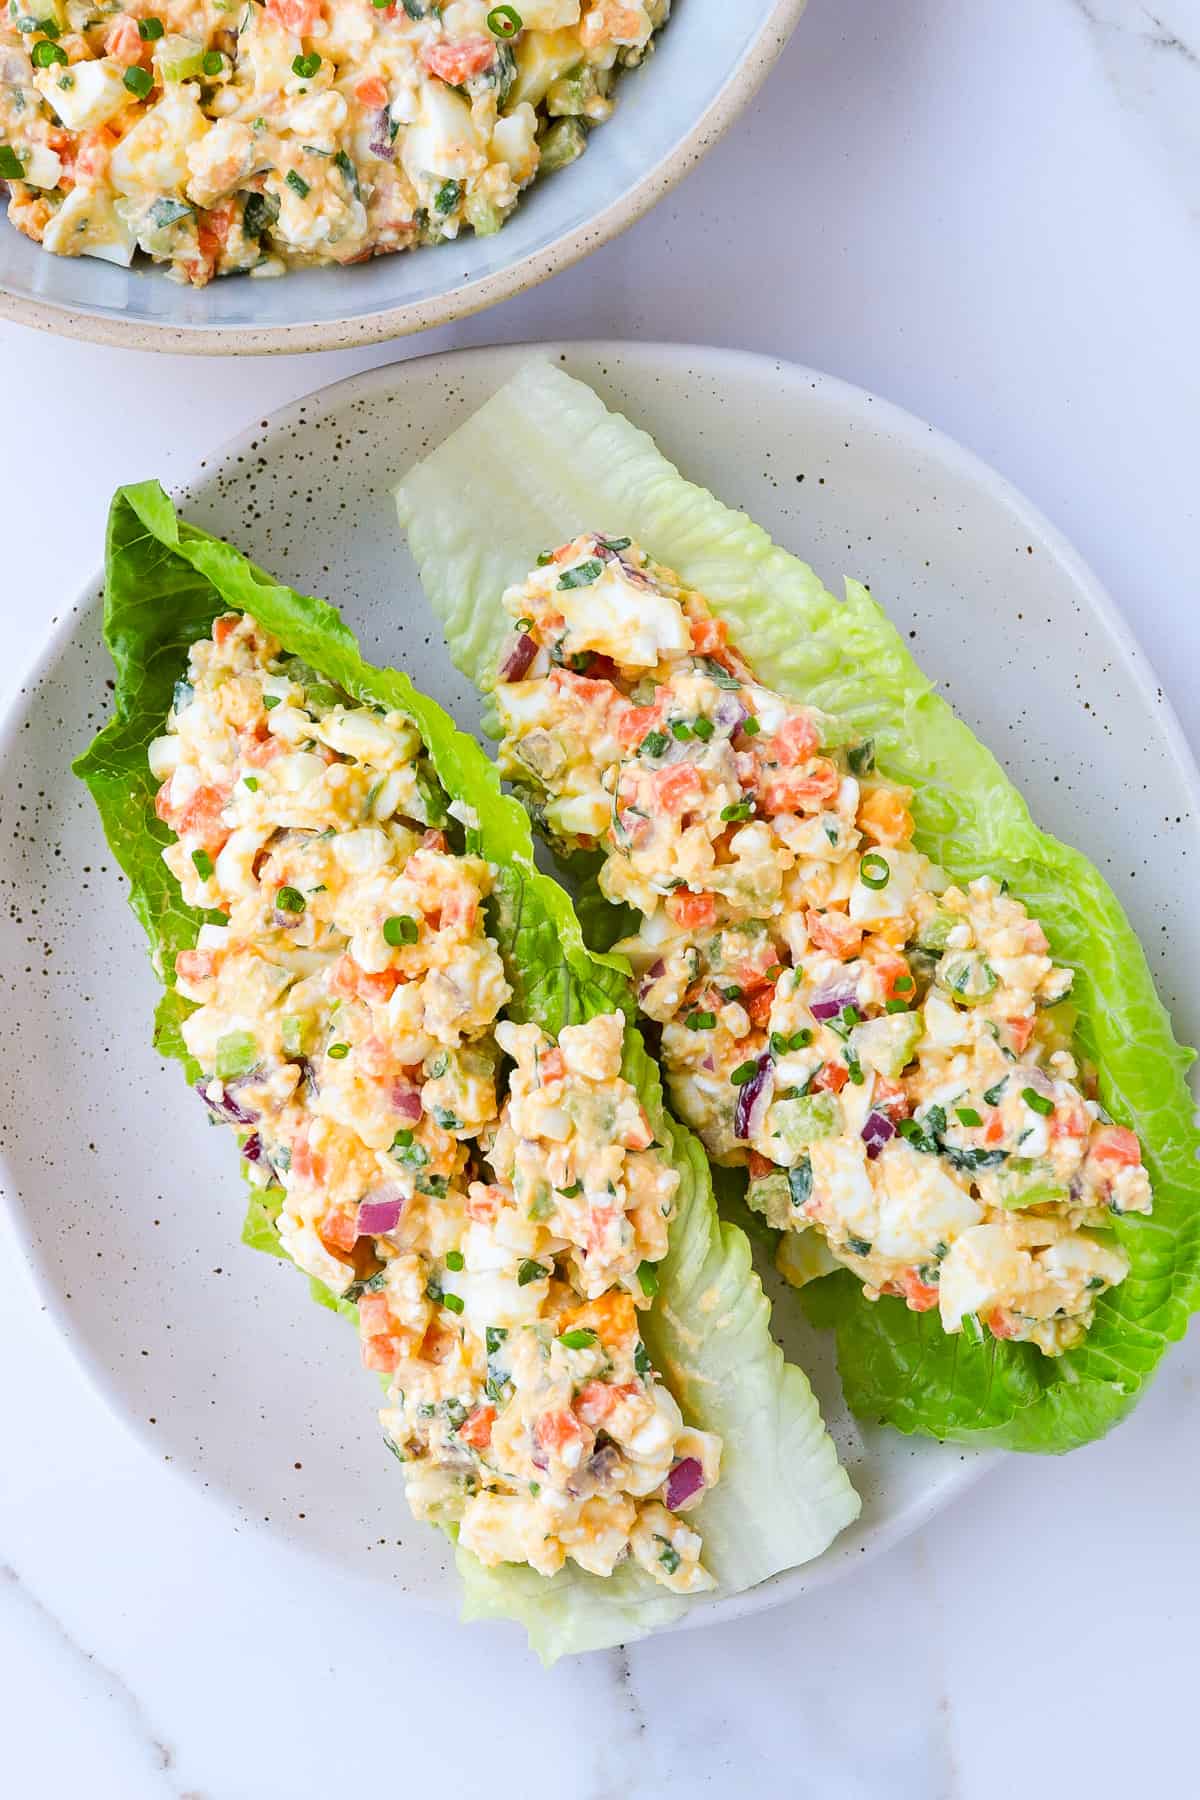 Cottage cheese egg salad in lettuce wraps.